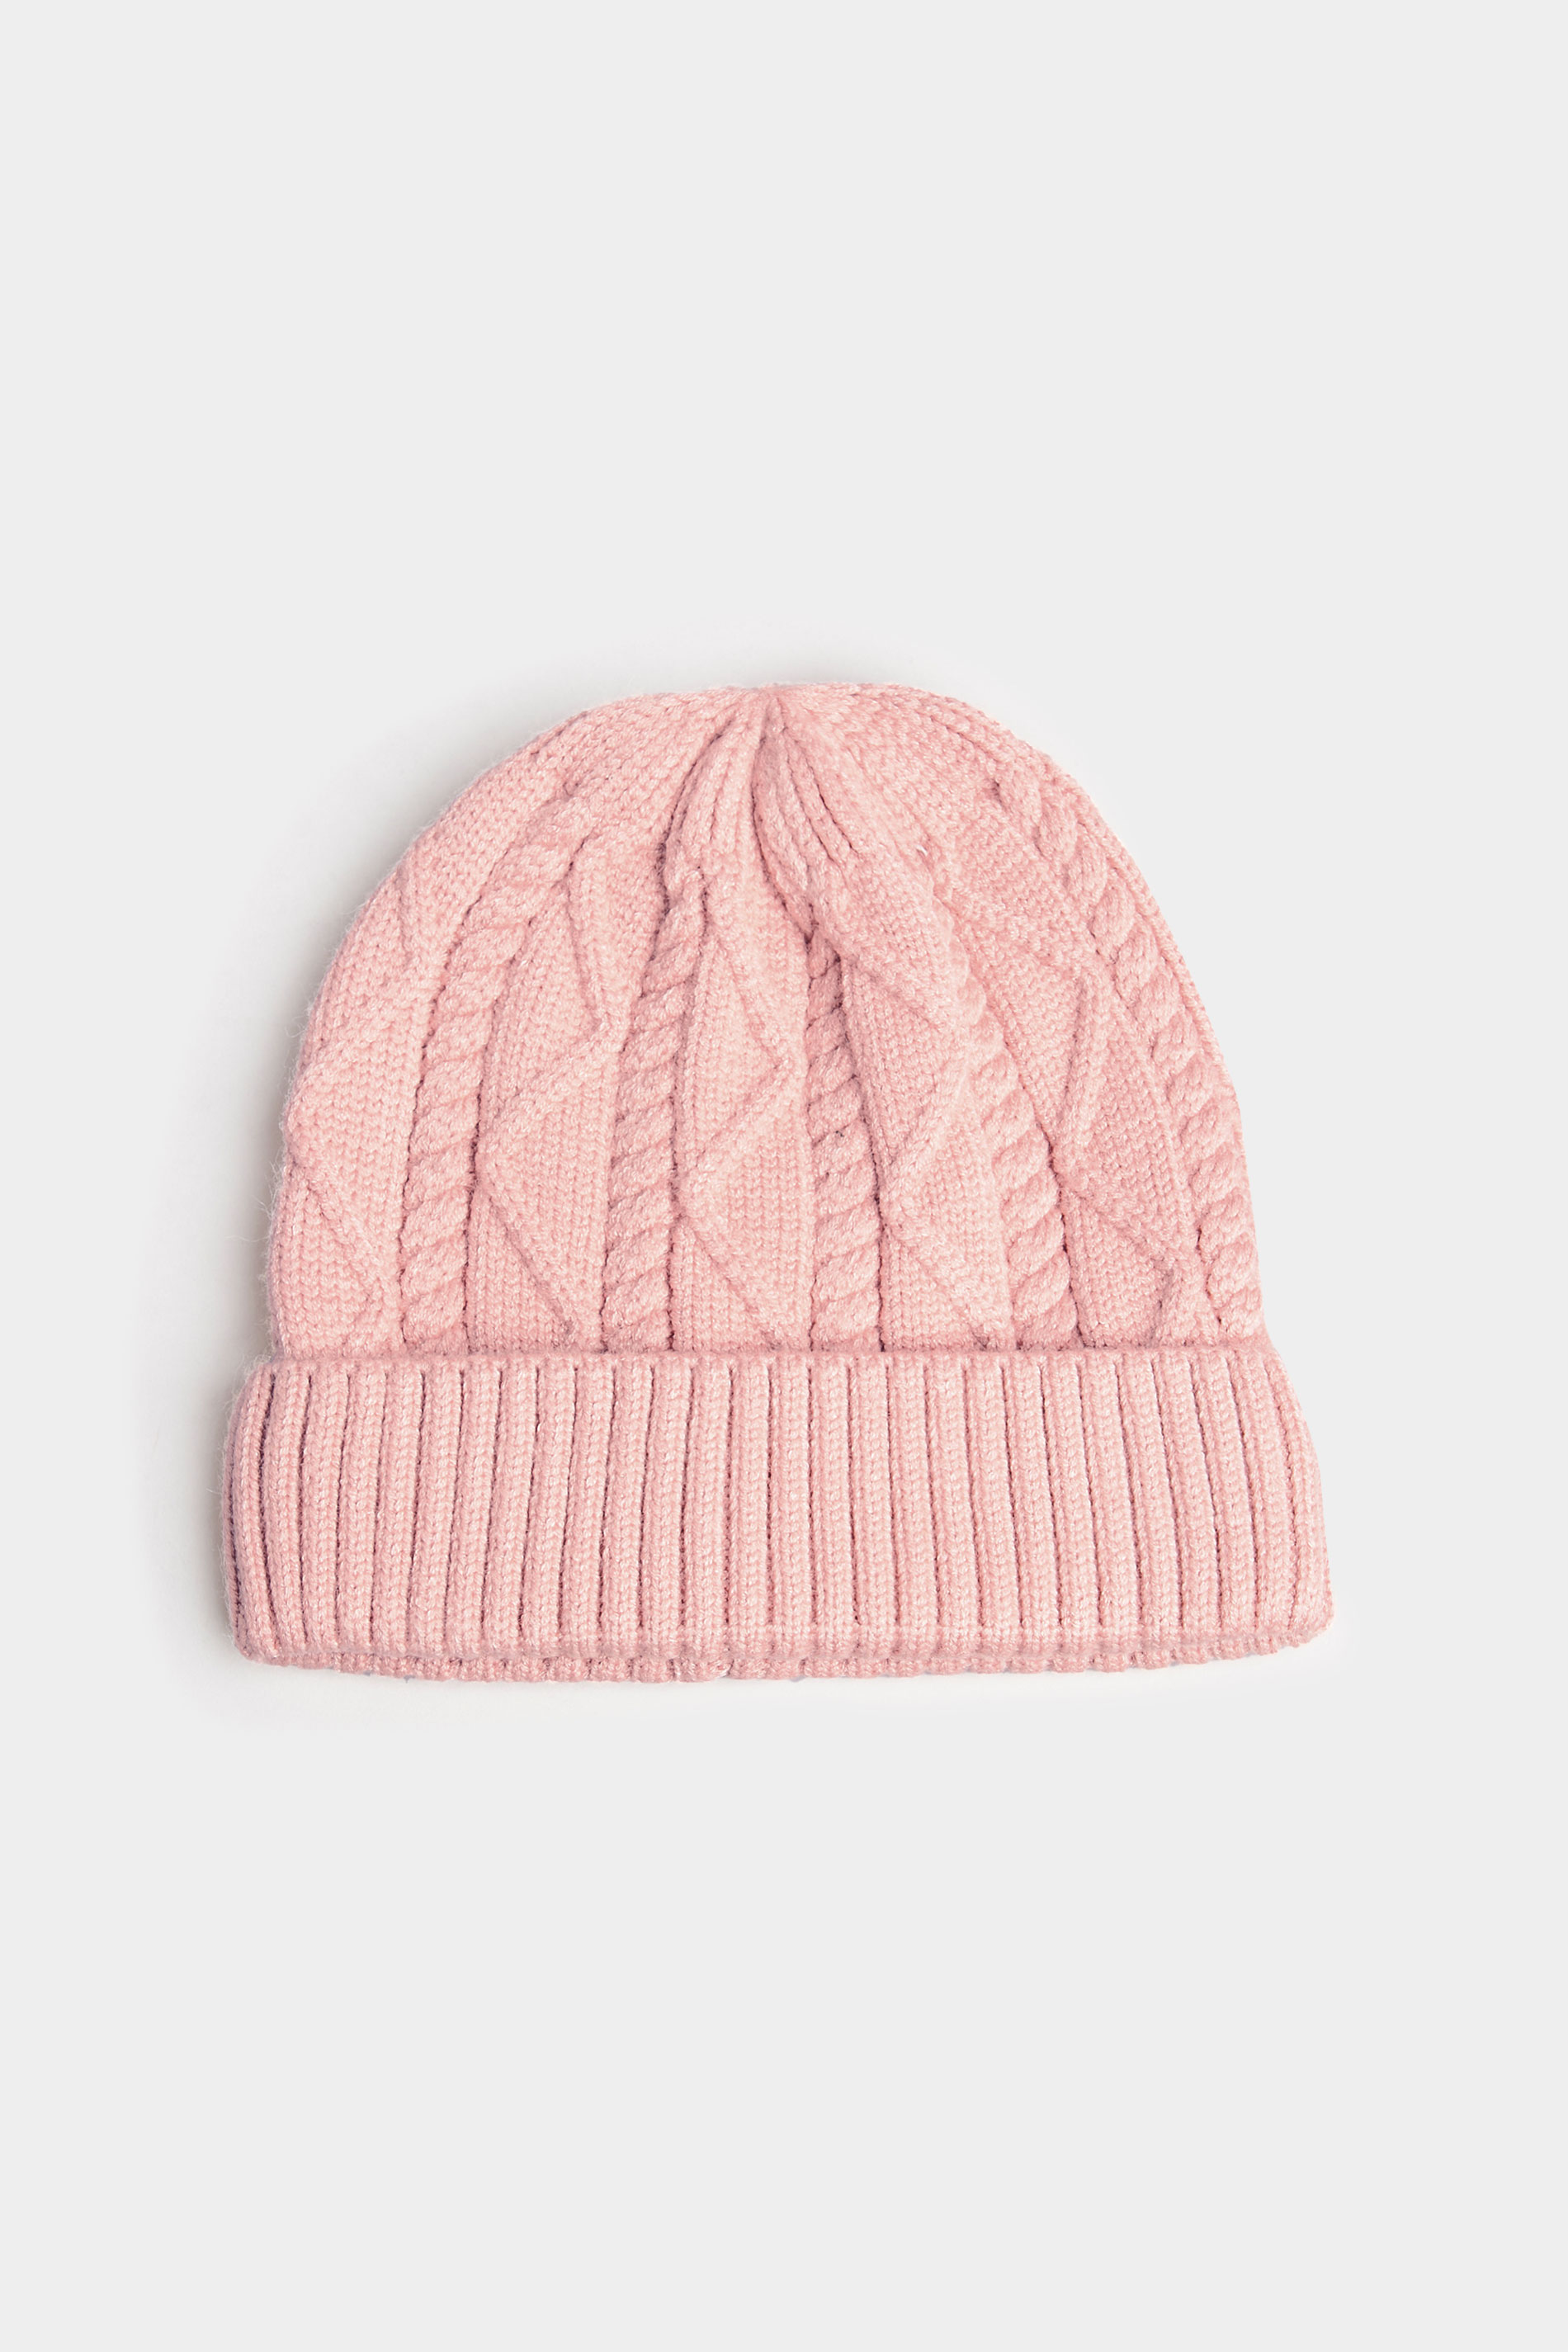 Pink Cable Knitted Beanie Hat_A.jpg